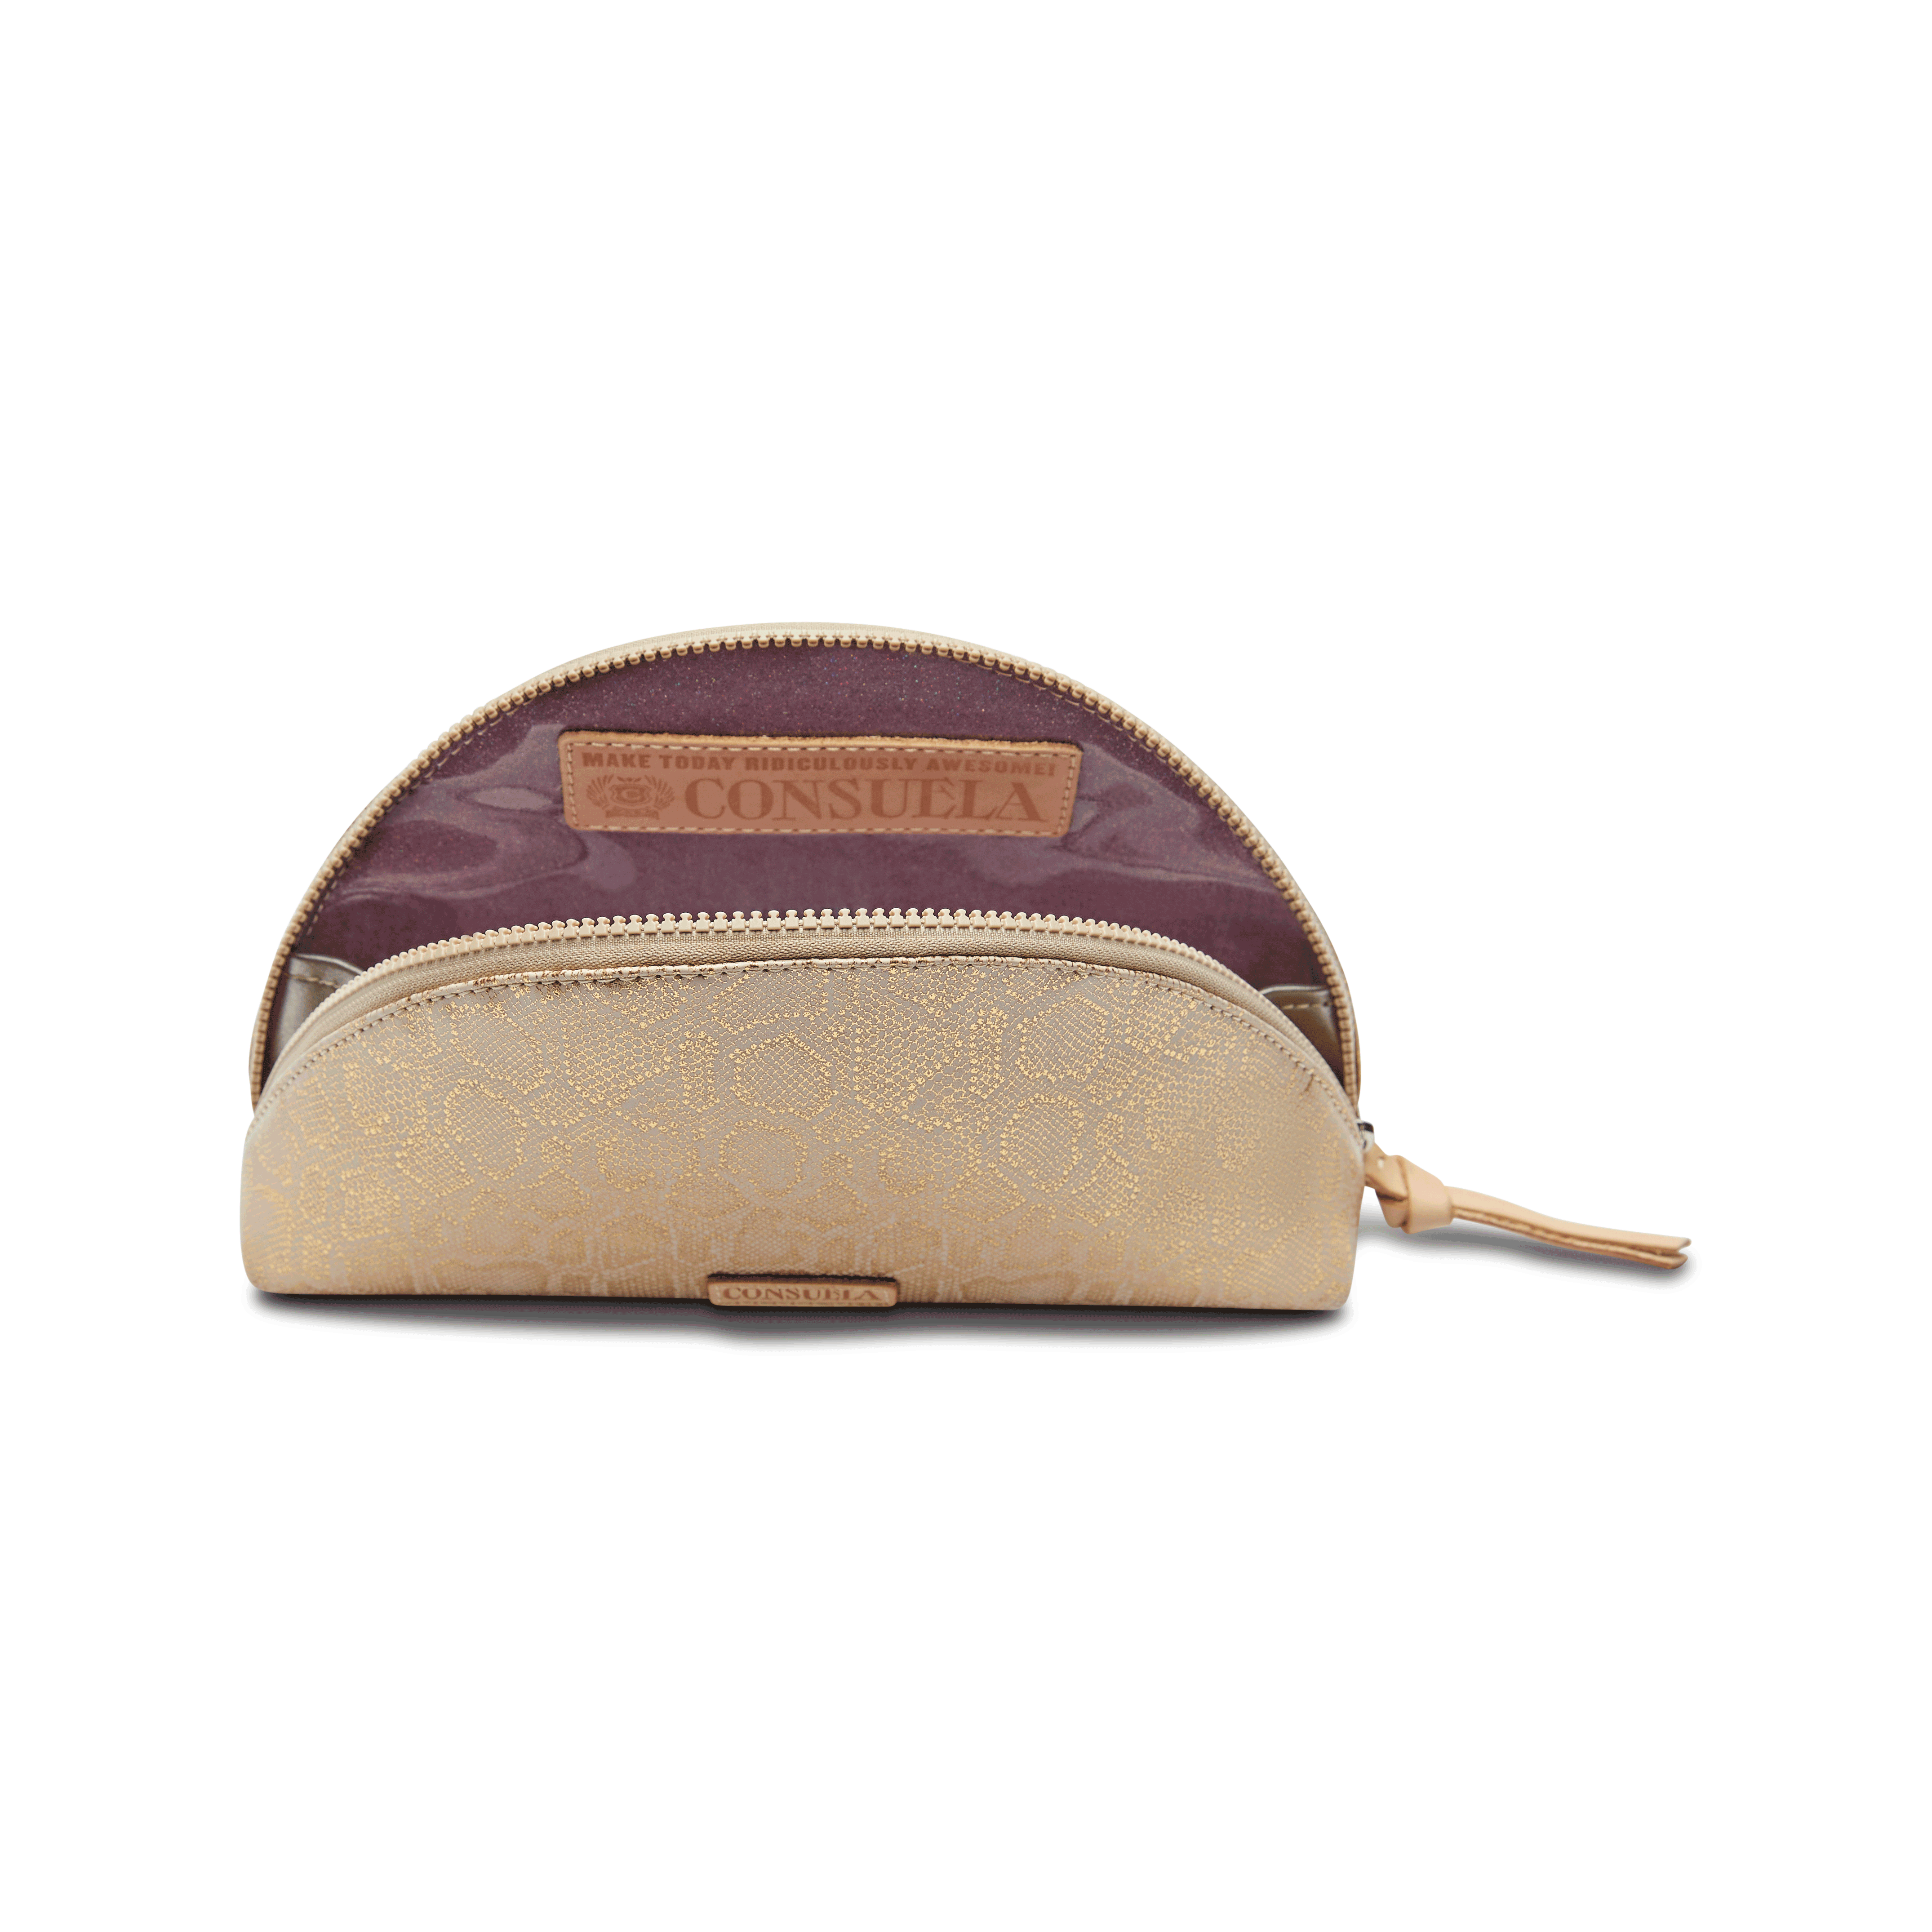 Consuela | Gilded Large Cosmetic Case - Giddy Up Glamour Boutique